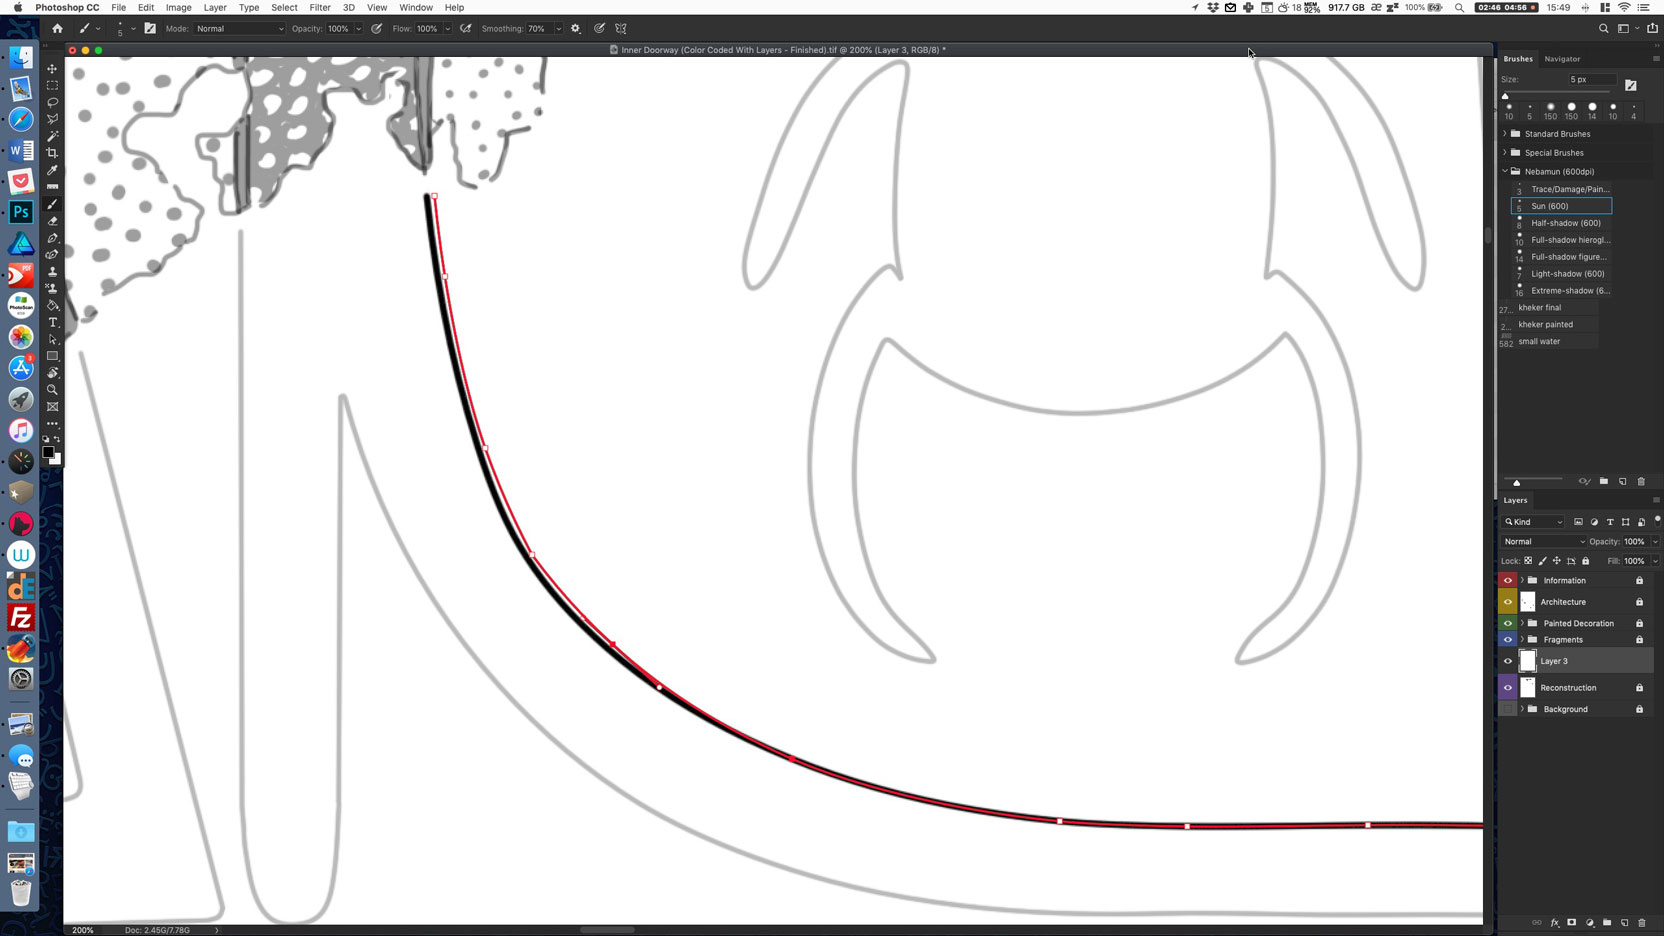 Drawing sun-shadow transitions using the Curvature Pen tool